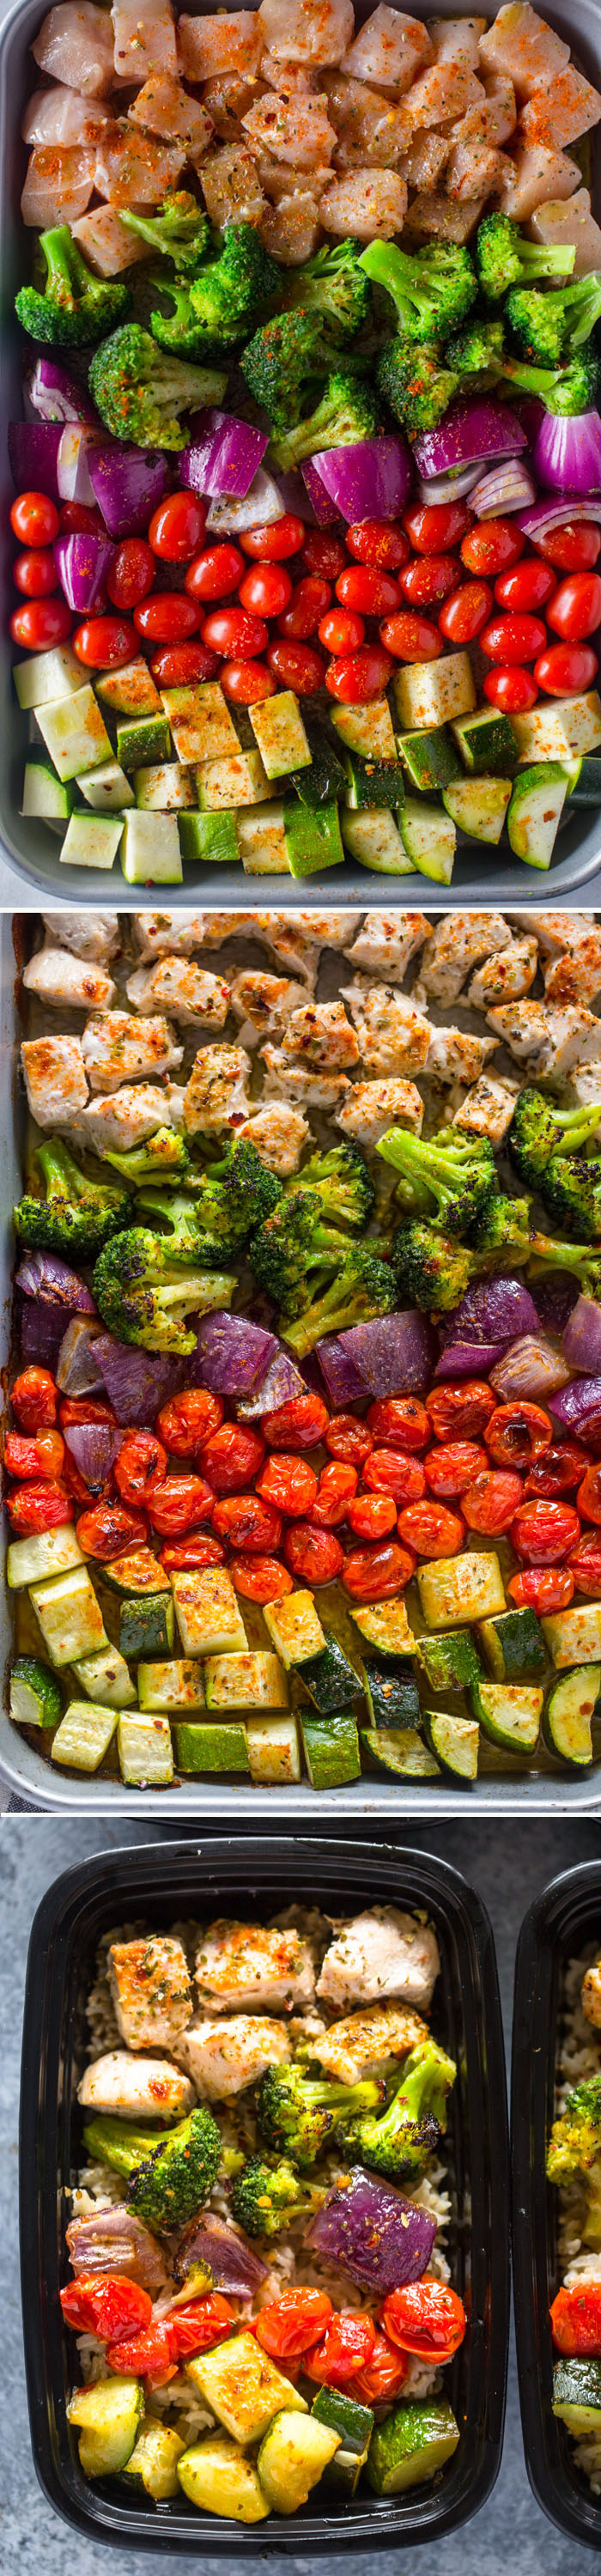 Meal Prep – Healthy Roasted Chicken and Veggies |